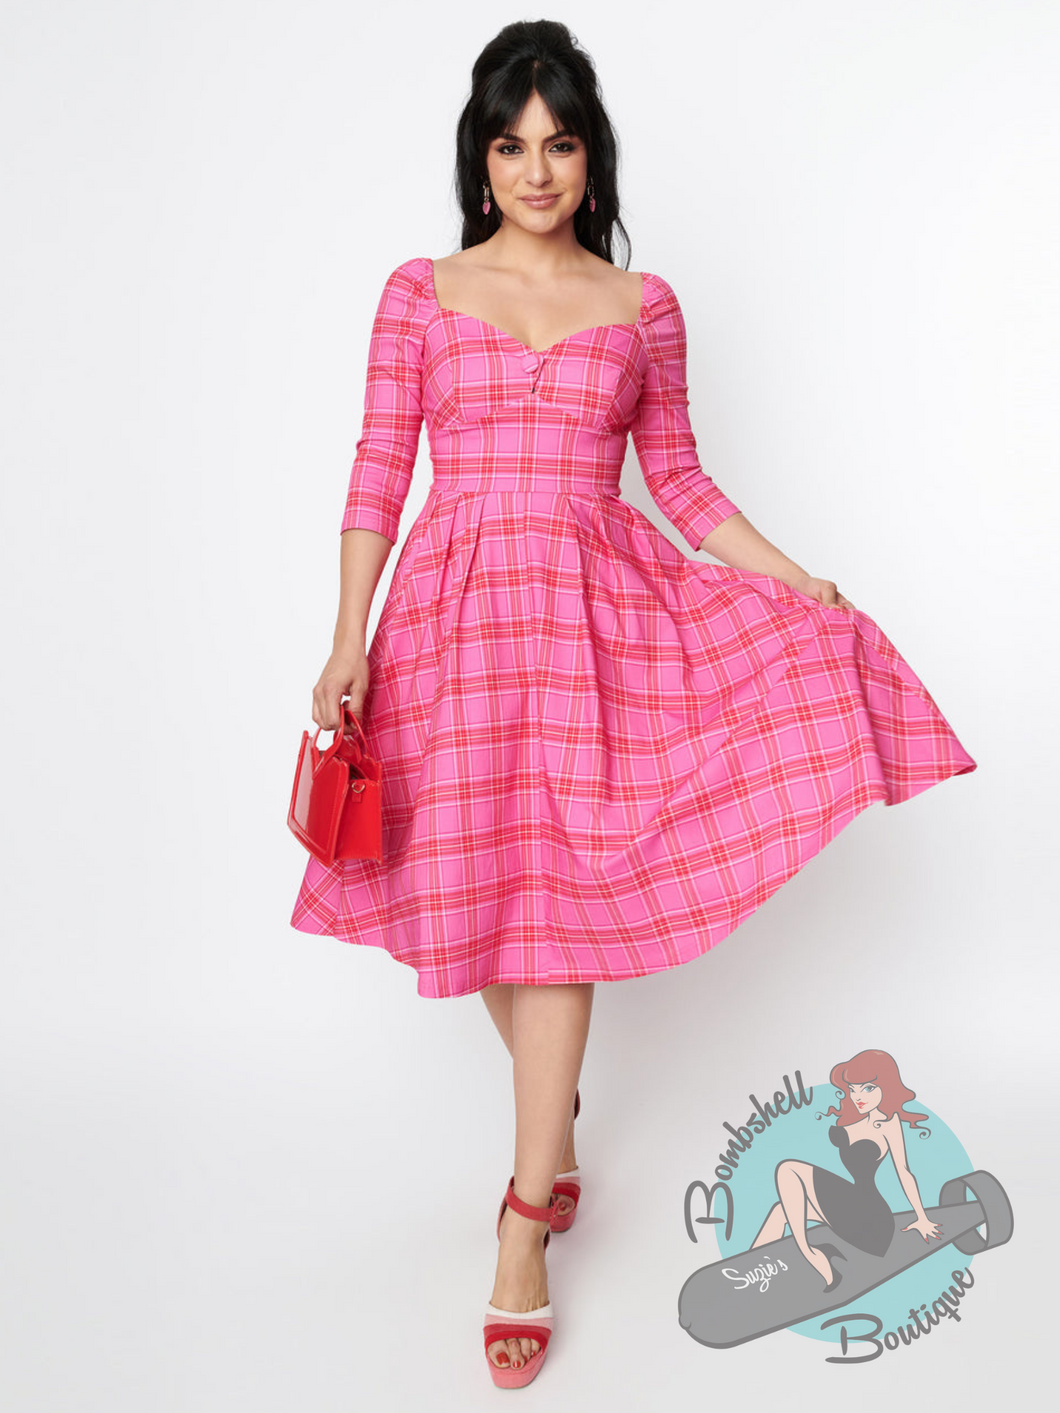 Pink tartan vintage inspired swing dress in 1950s pinup style featuring a pink and red tartan, sweetheart neckline, and pockets.